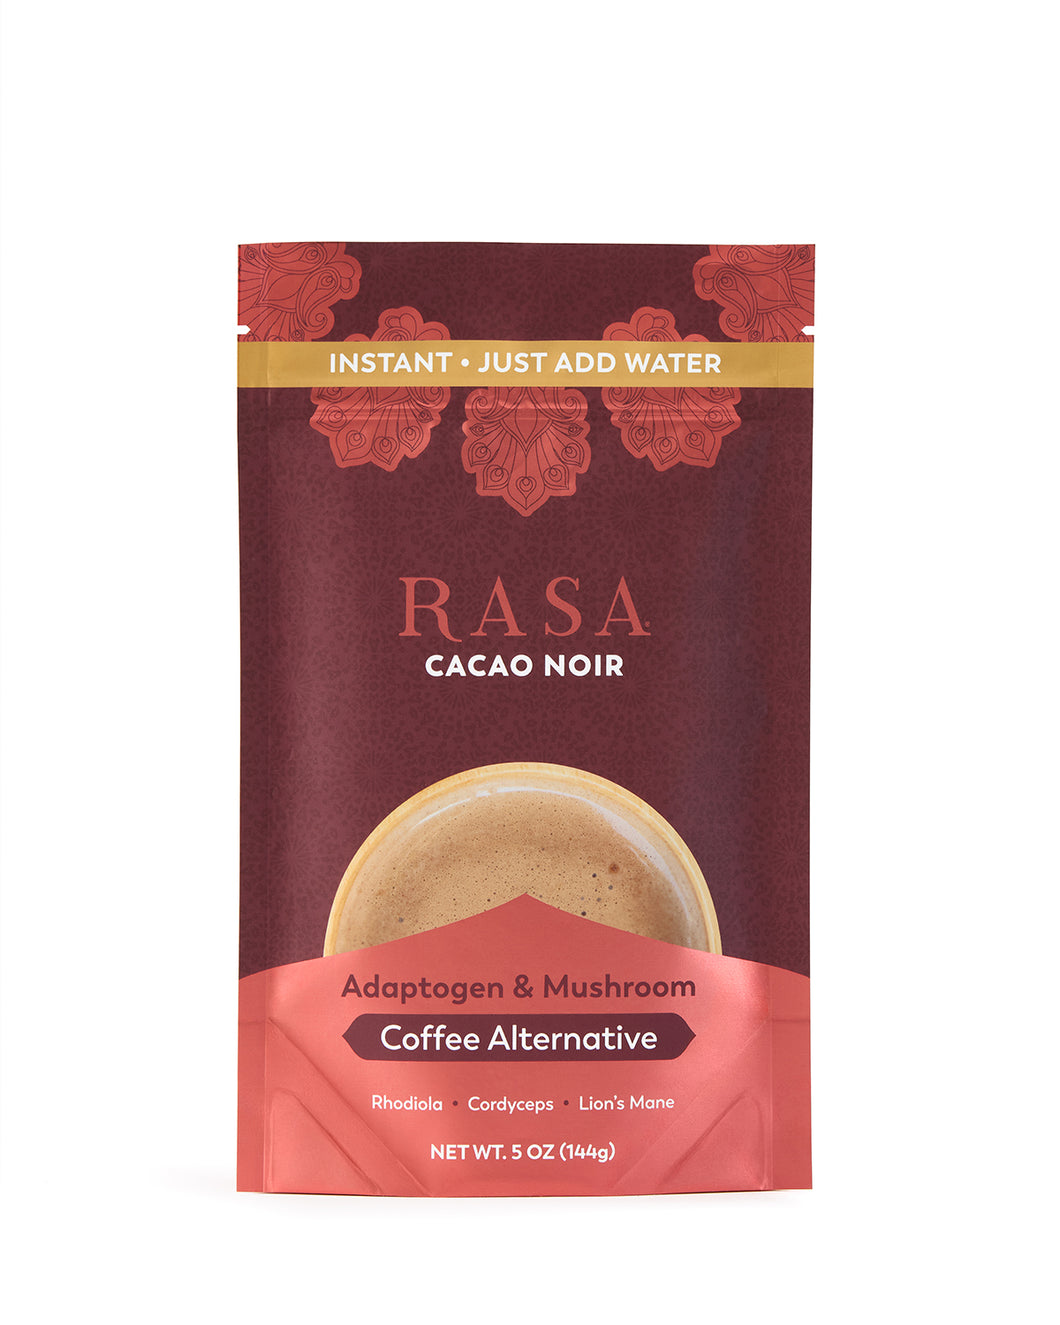 Cacao Noir 5oz - Case of 6 - Just Add Water!